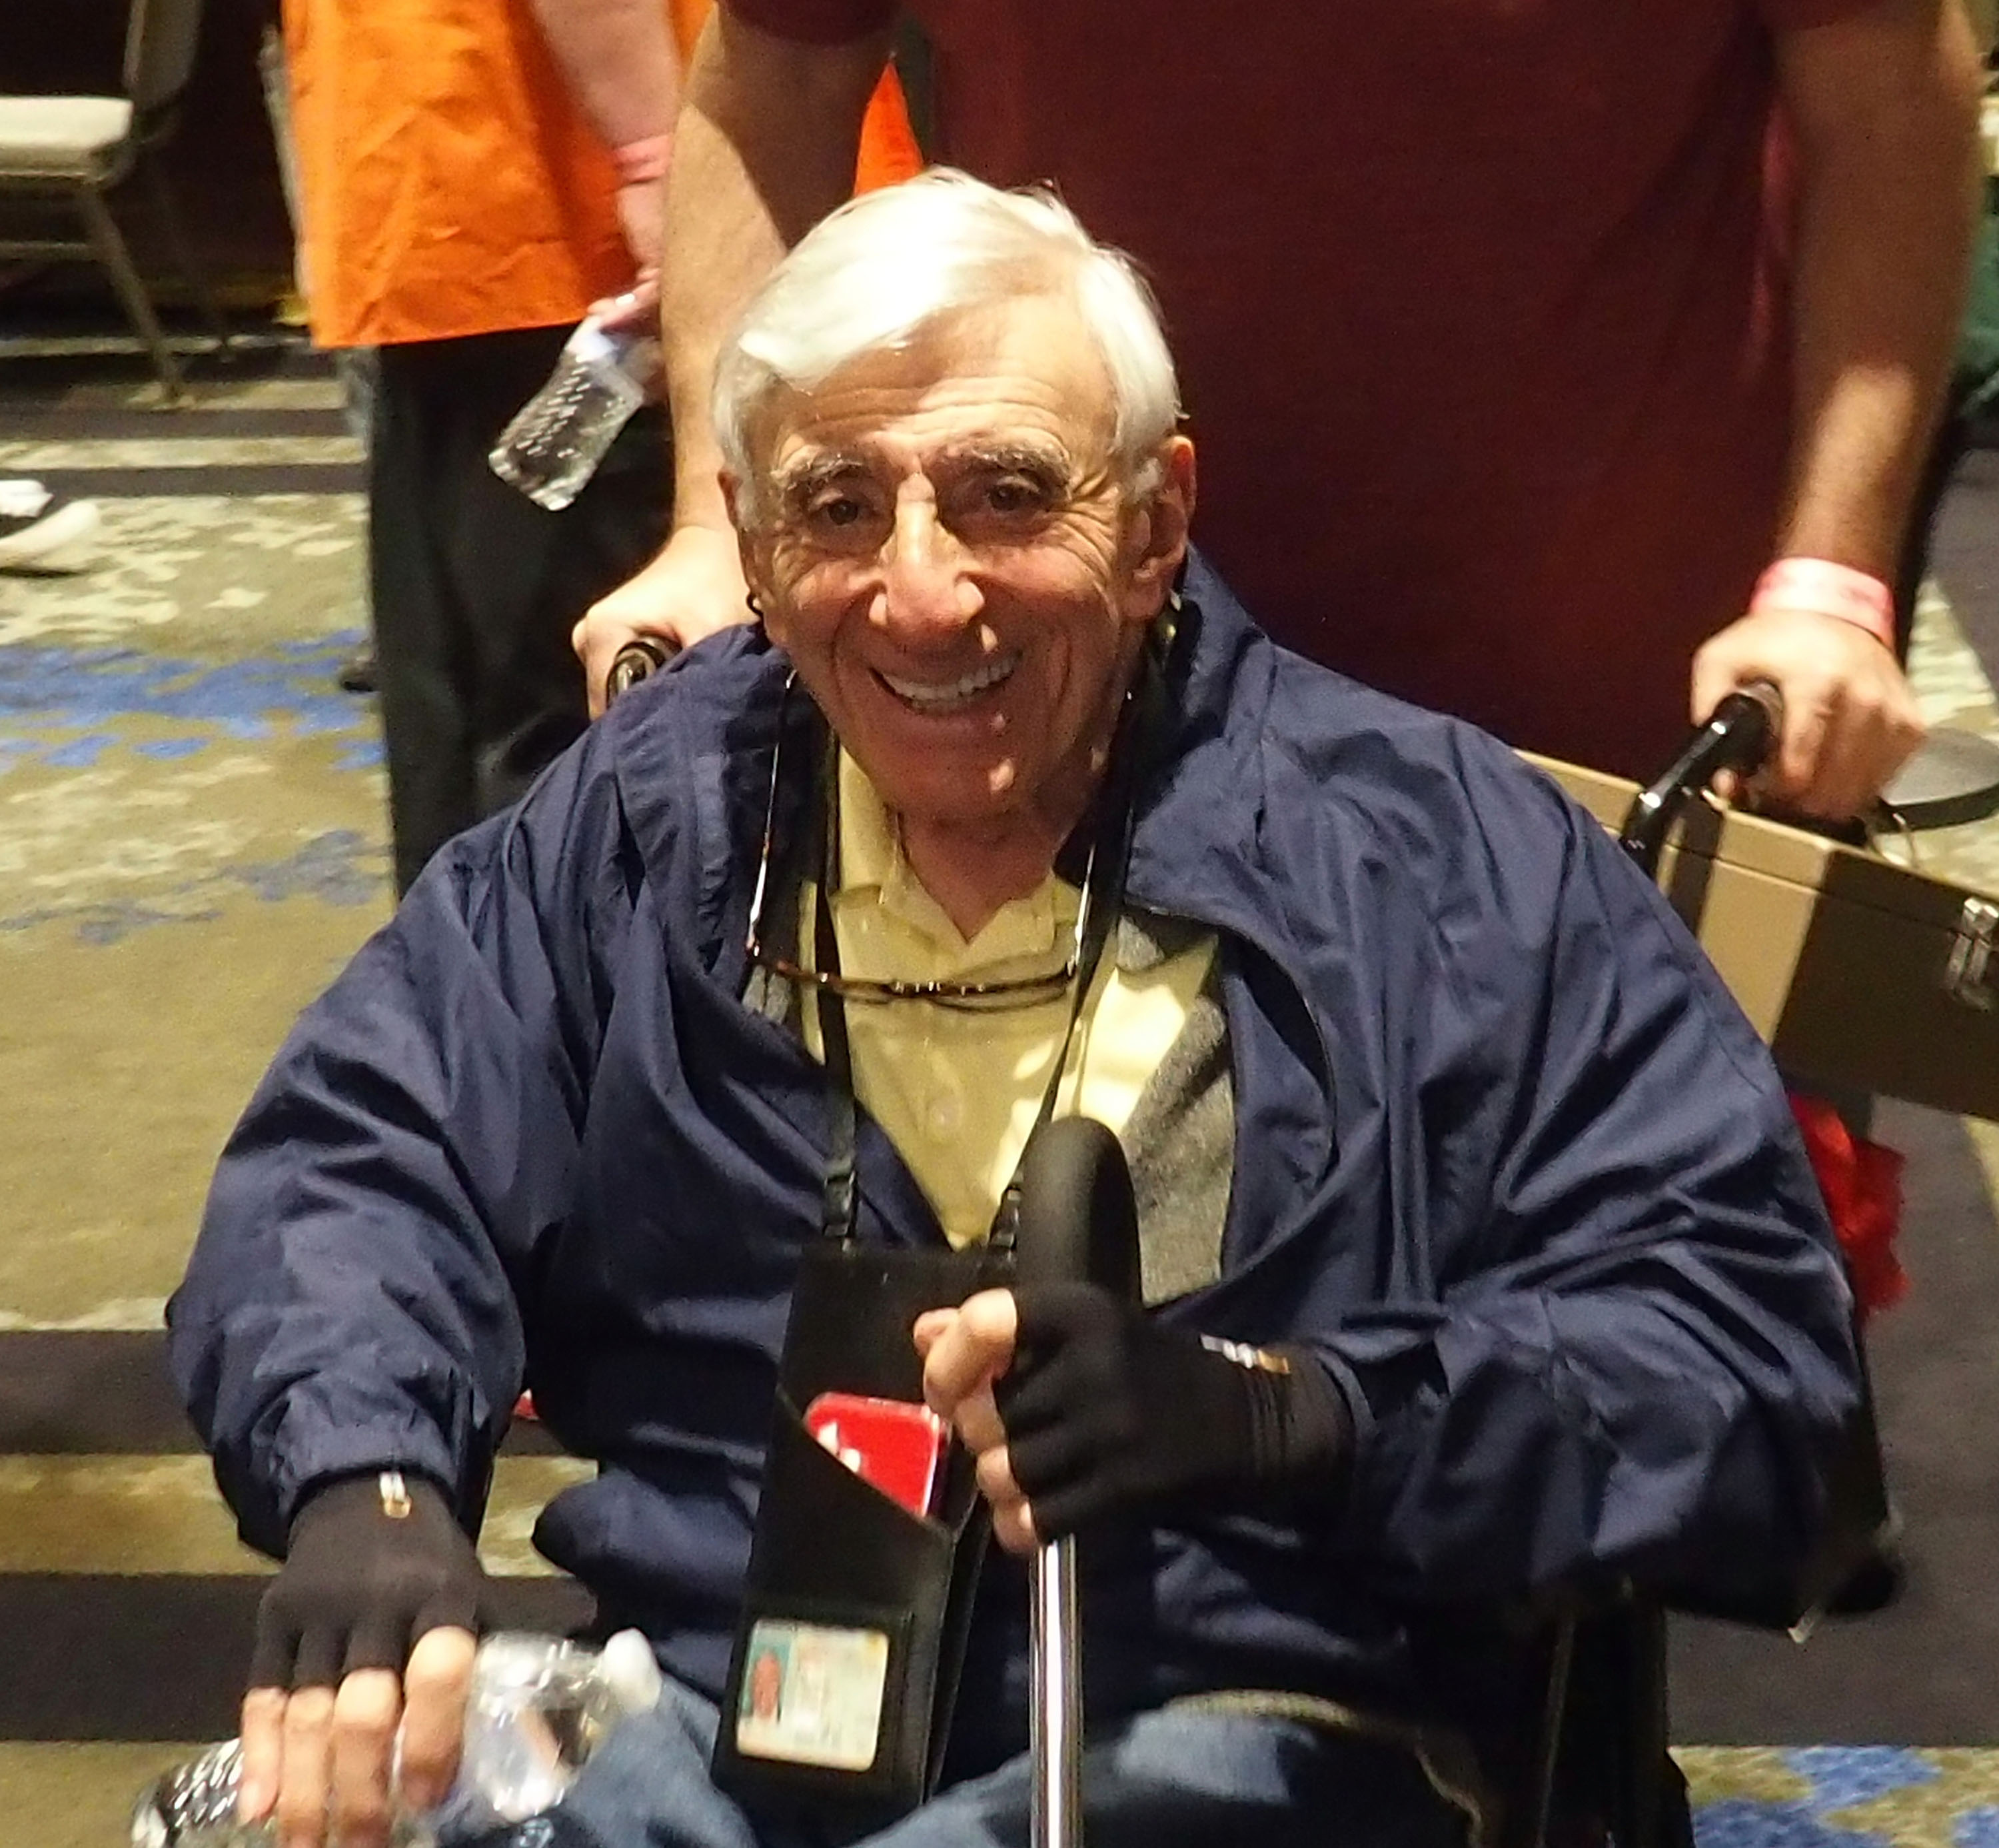 Jamie Farr during the Chiller Theatre Expo Spring 2022 on April 29, 2022, in Parsippany, New Jersey. | Source: Getty Images